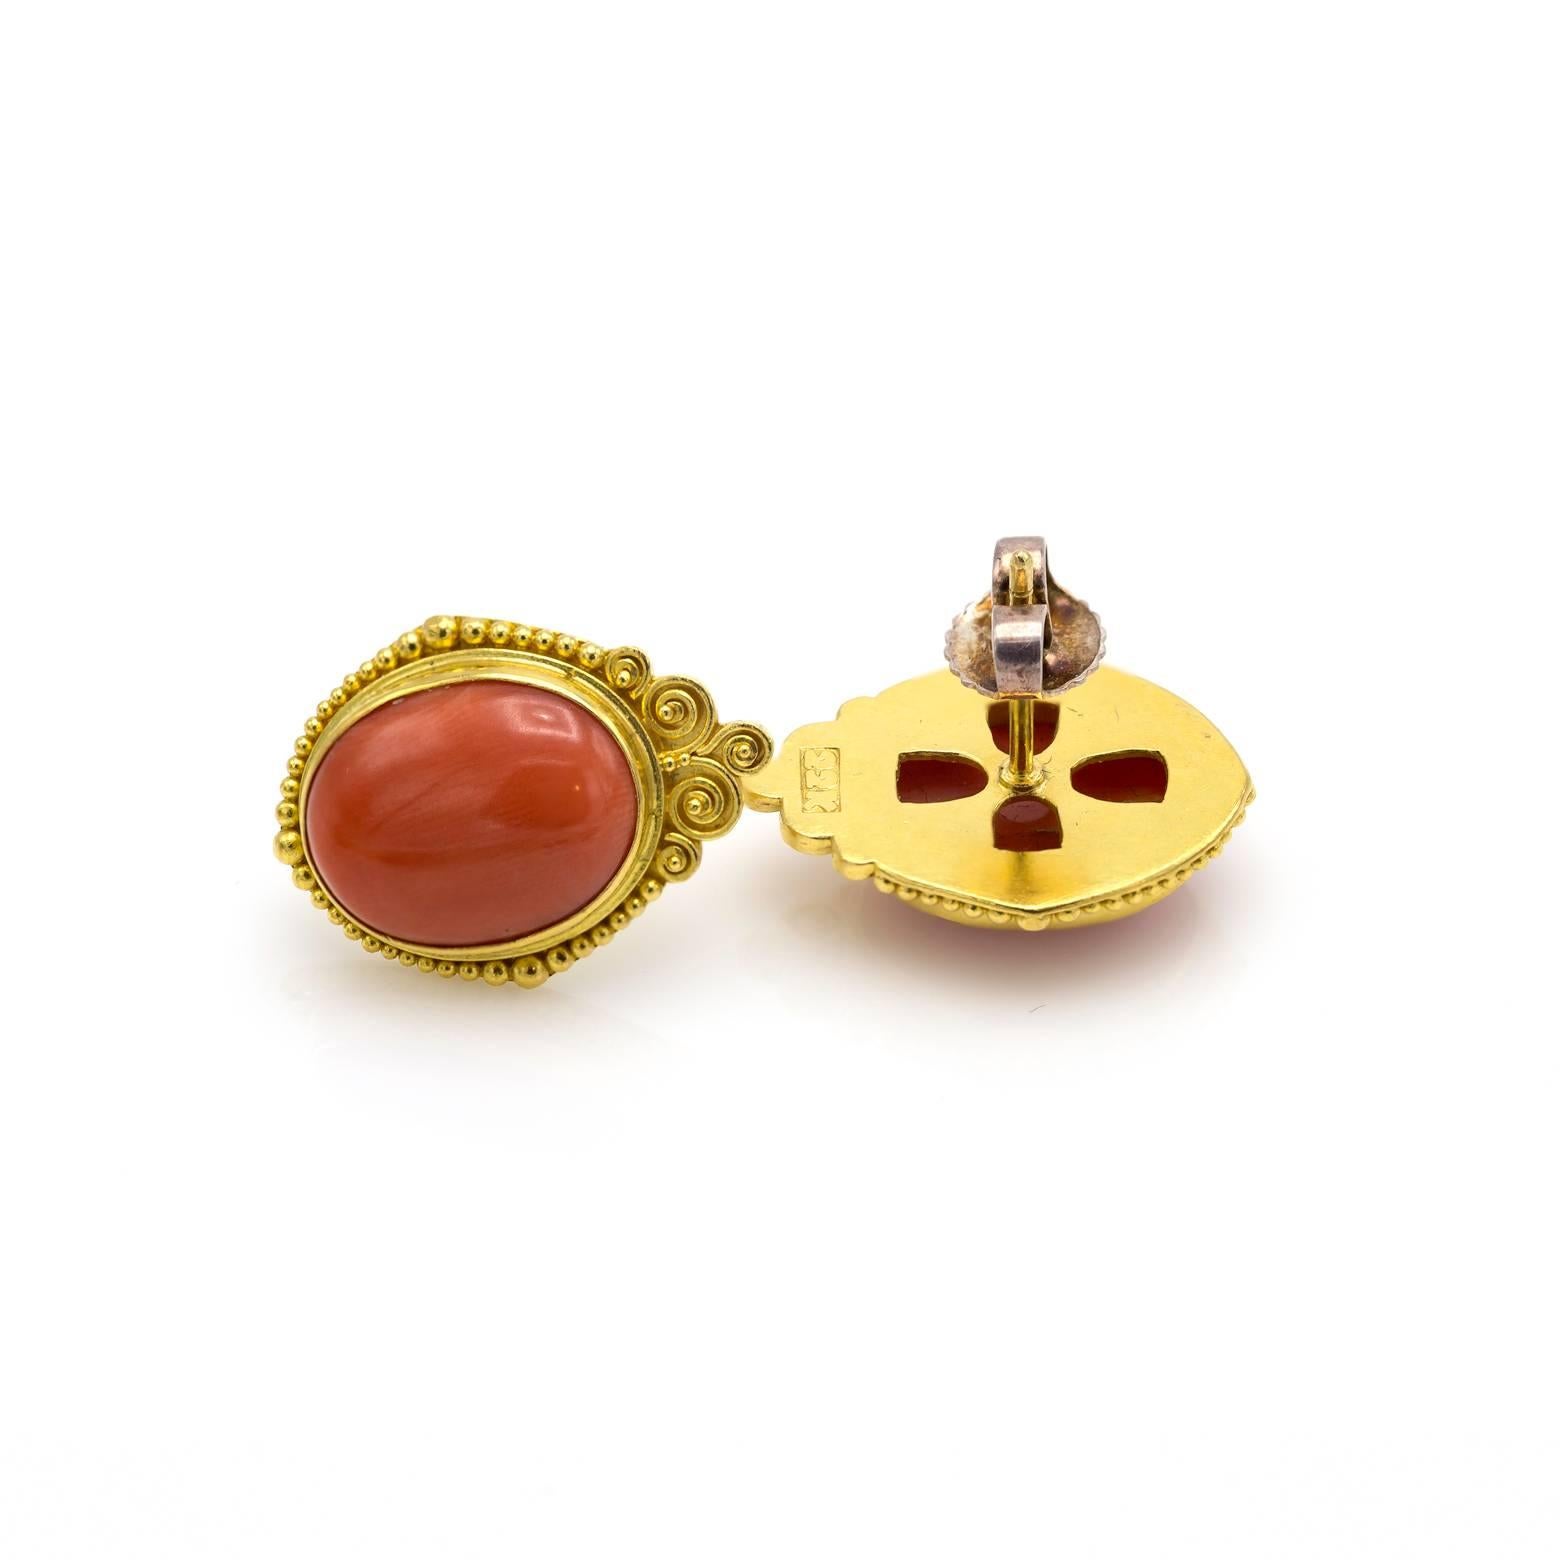 The warm glow of natural coral is beautifully set in beaded 22k gold. These stud earrings are elegant and timeless. A rare find!